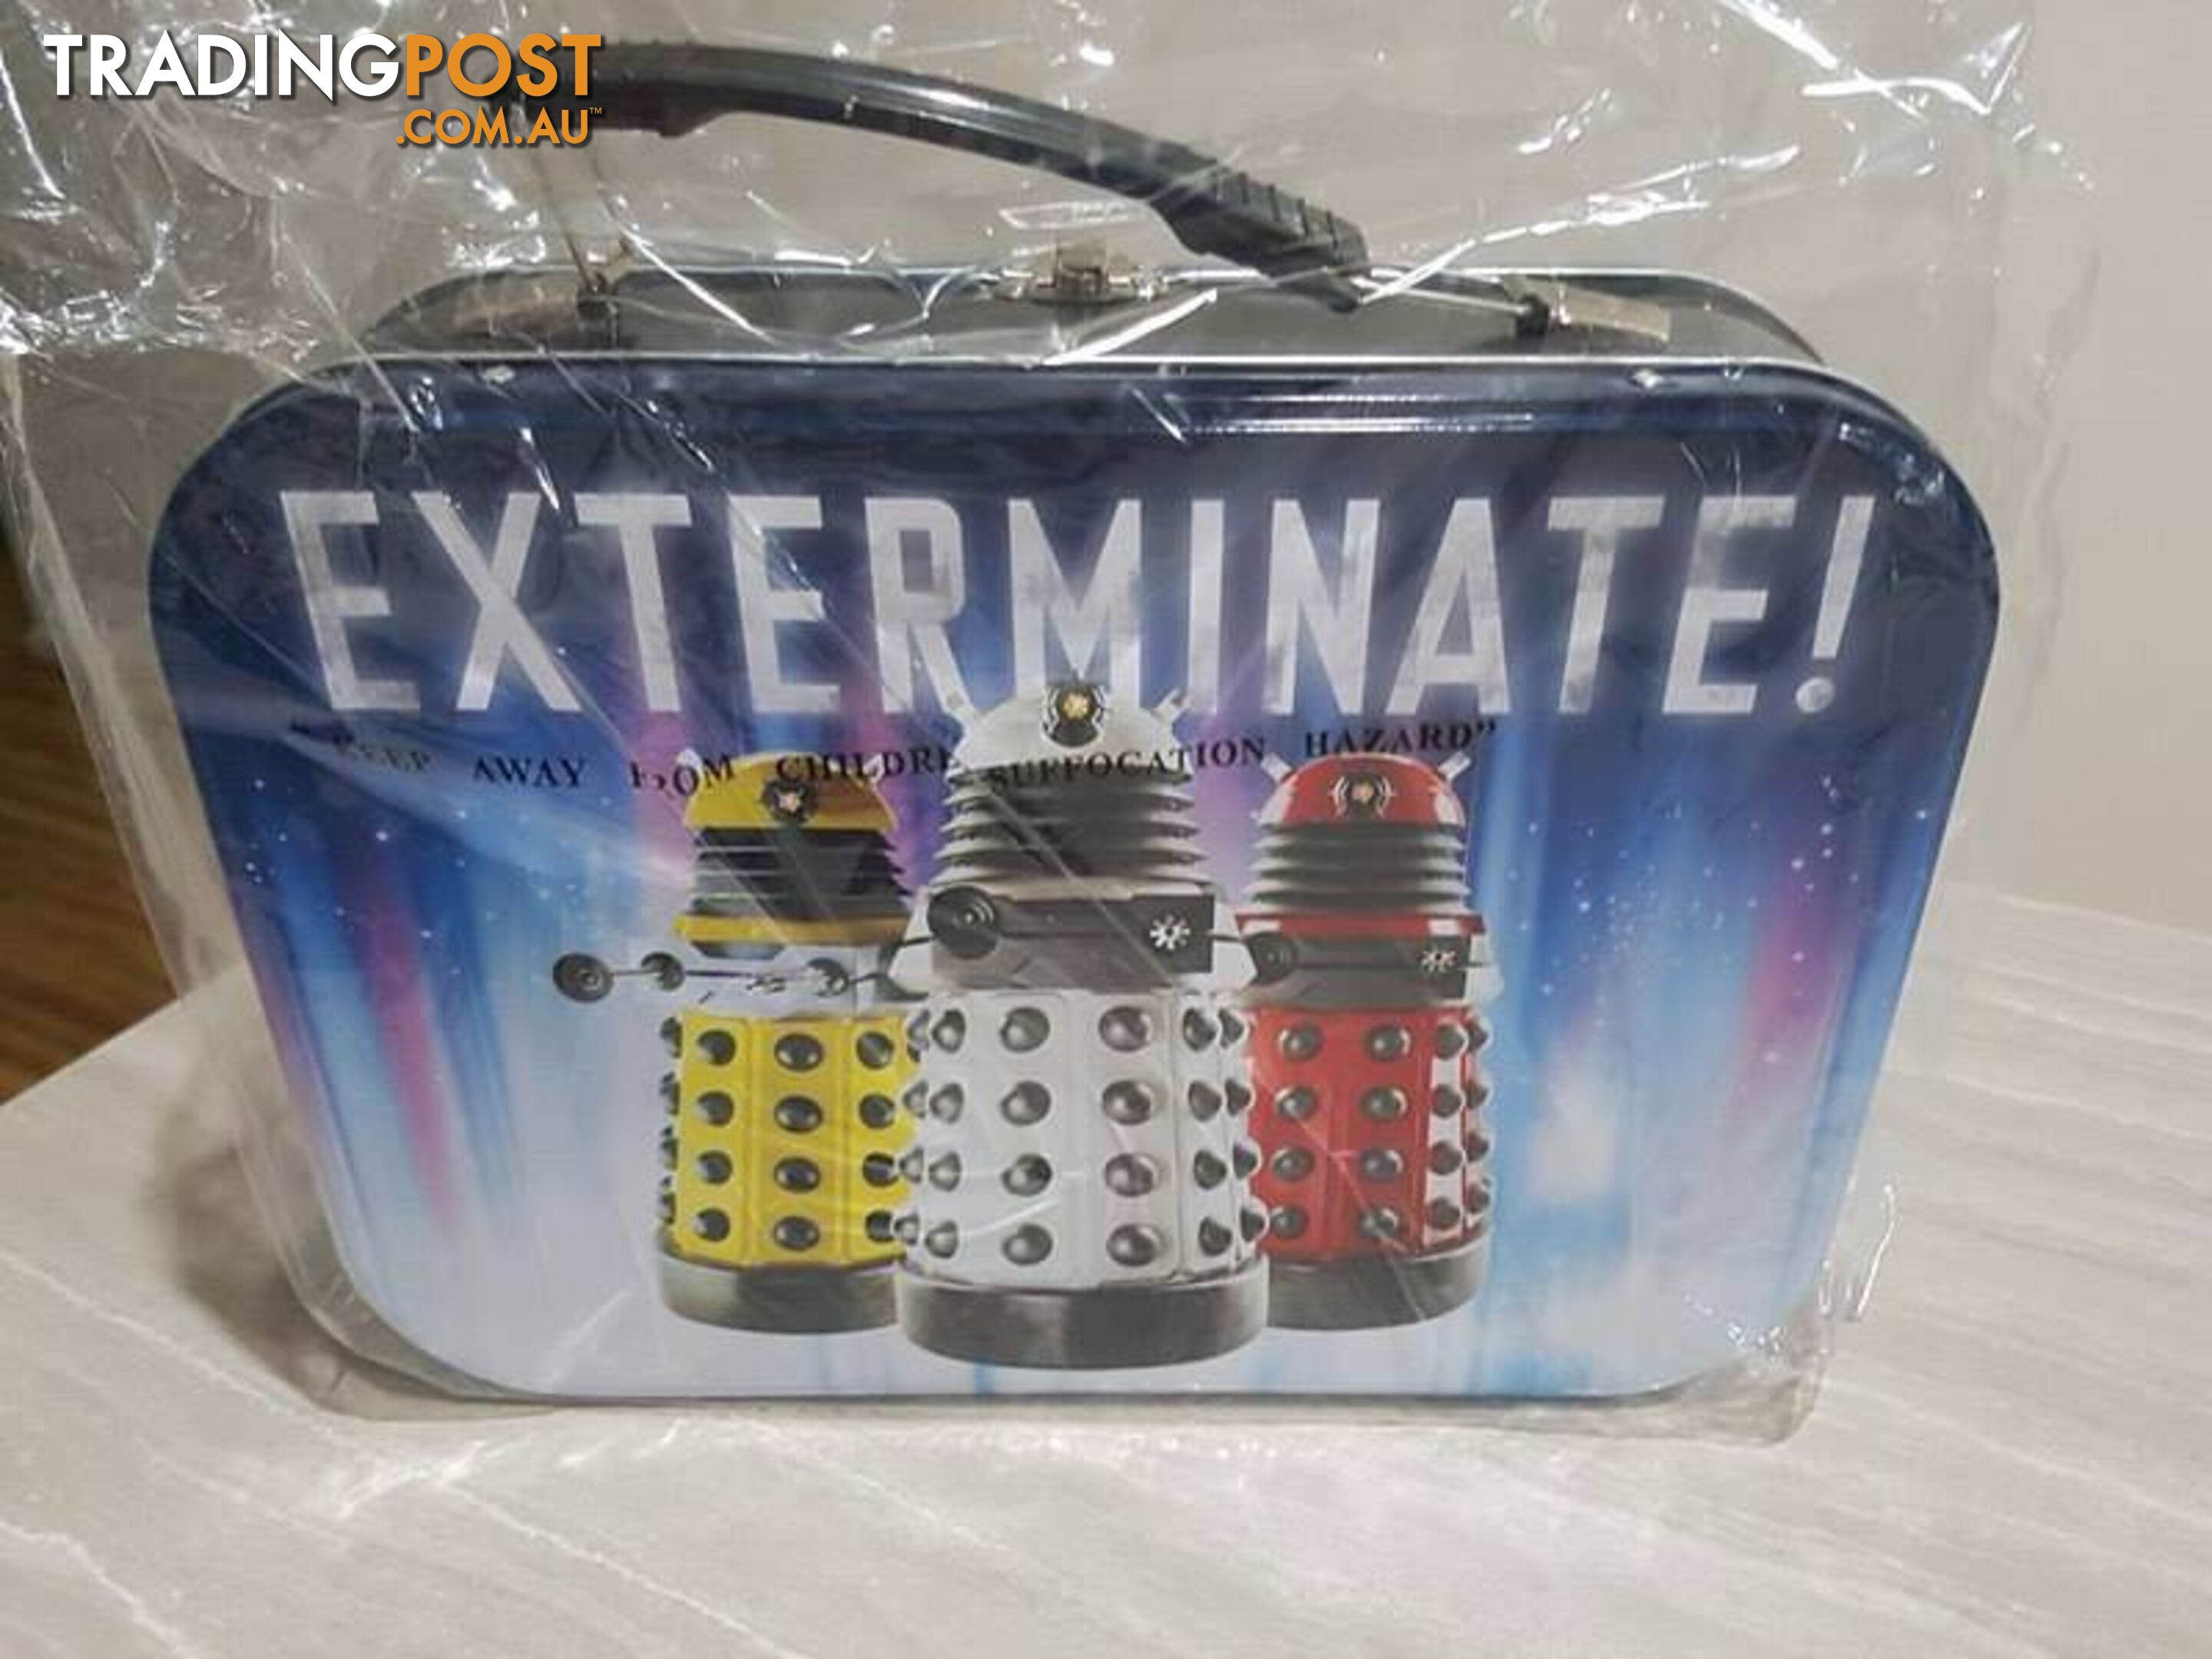 Doctor Who - Dalek 3-up Exterminate Lunchbox